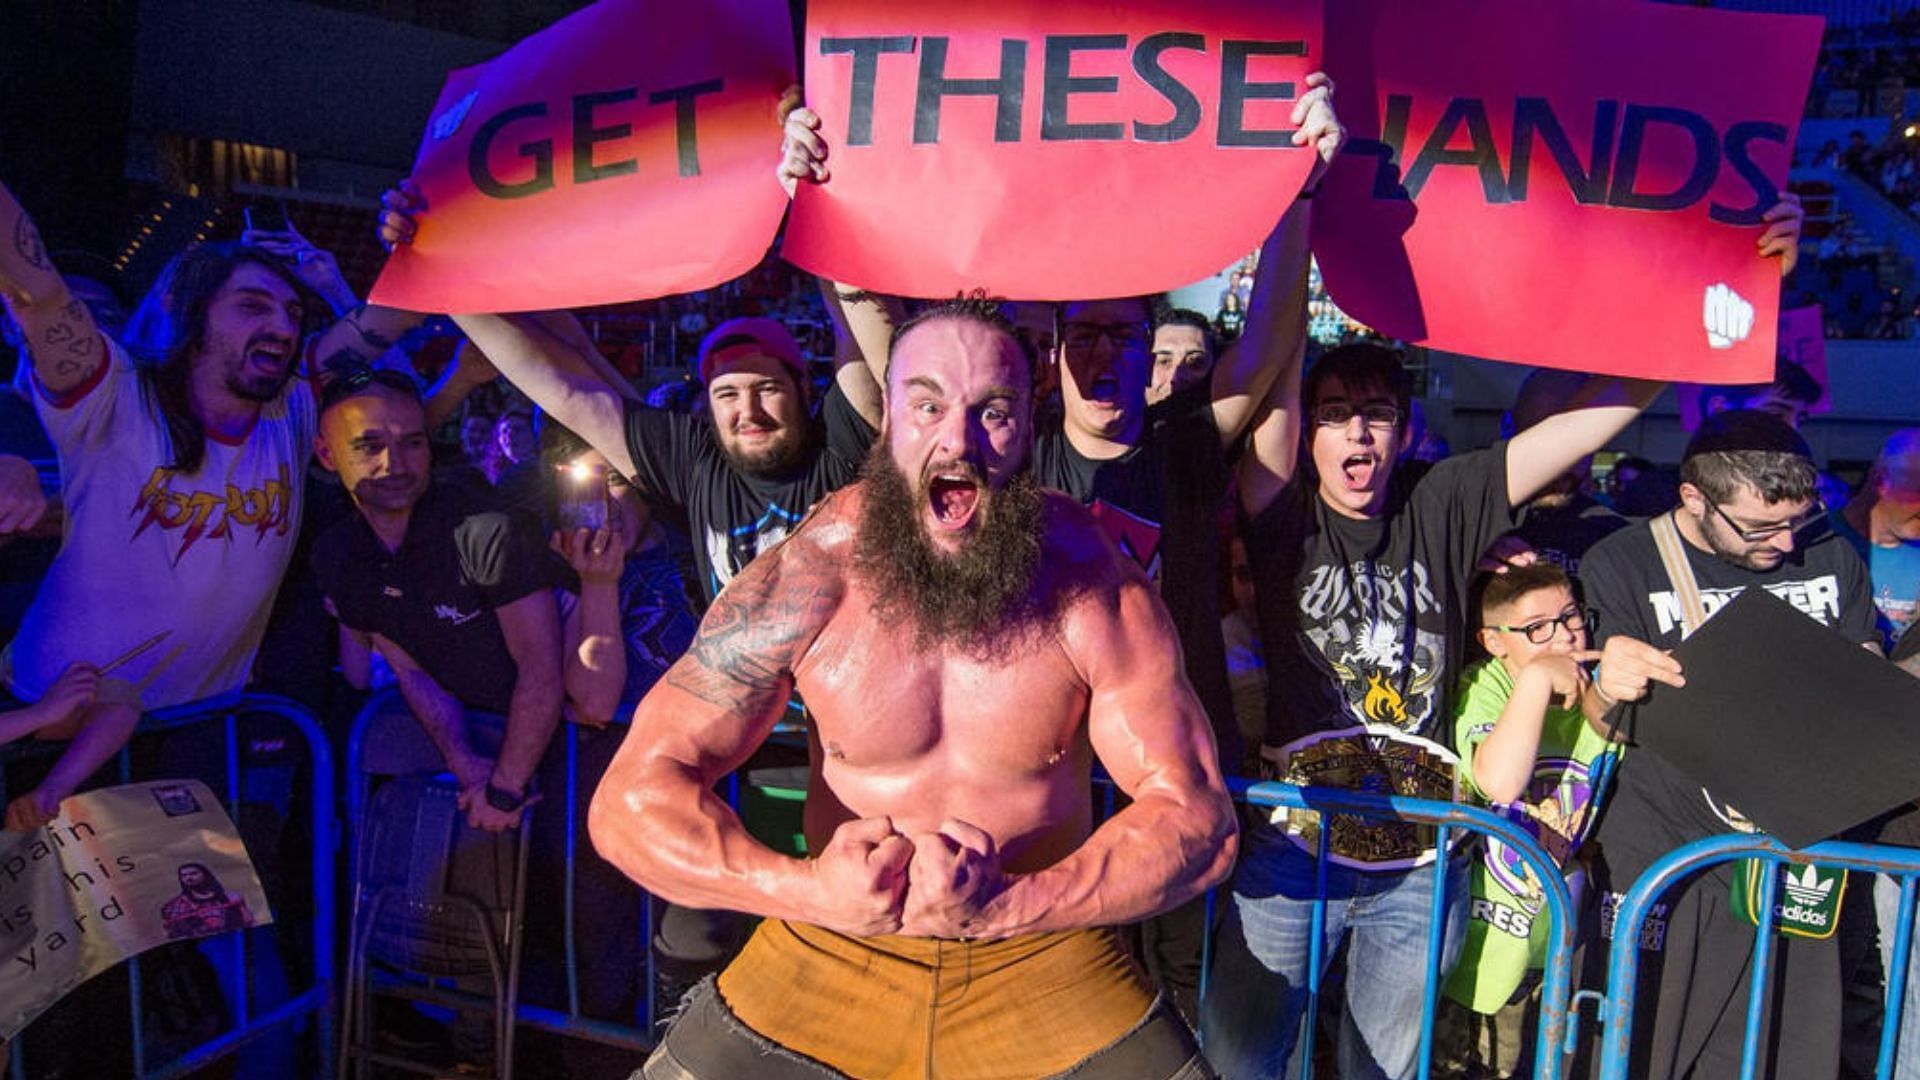 Braun Strowman is the #1 contender to the Intercontinental Championship